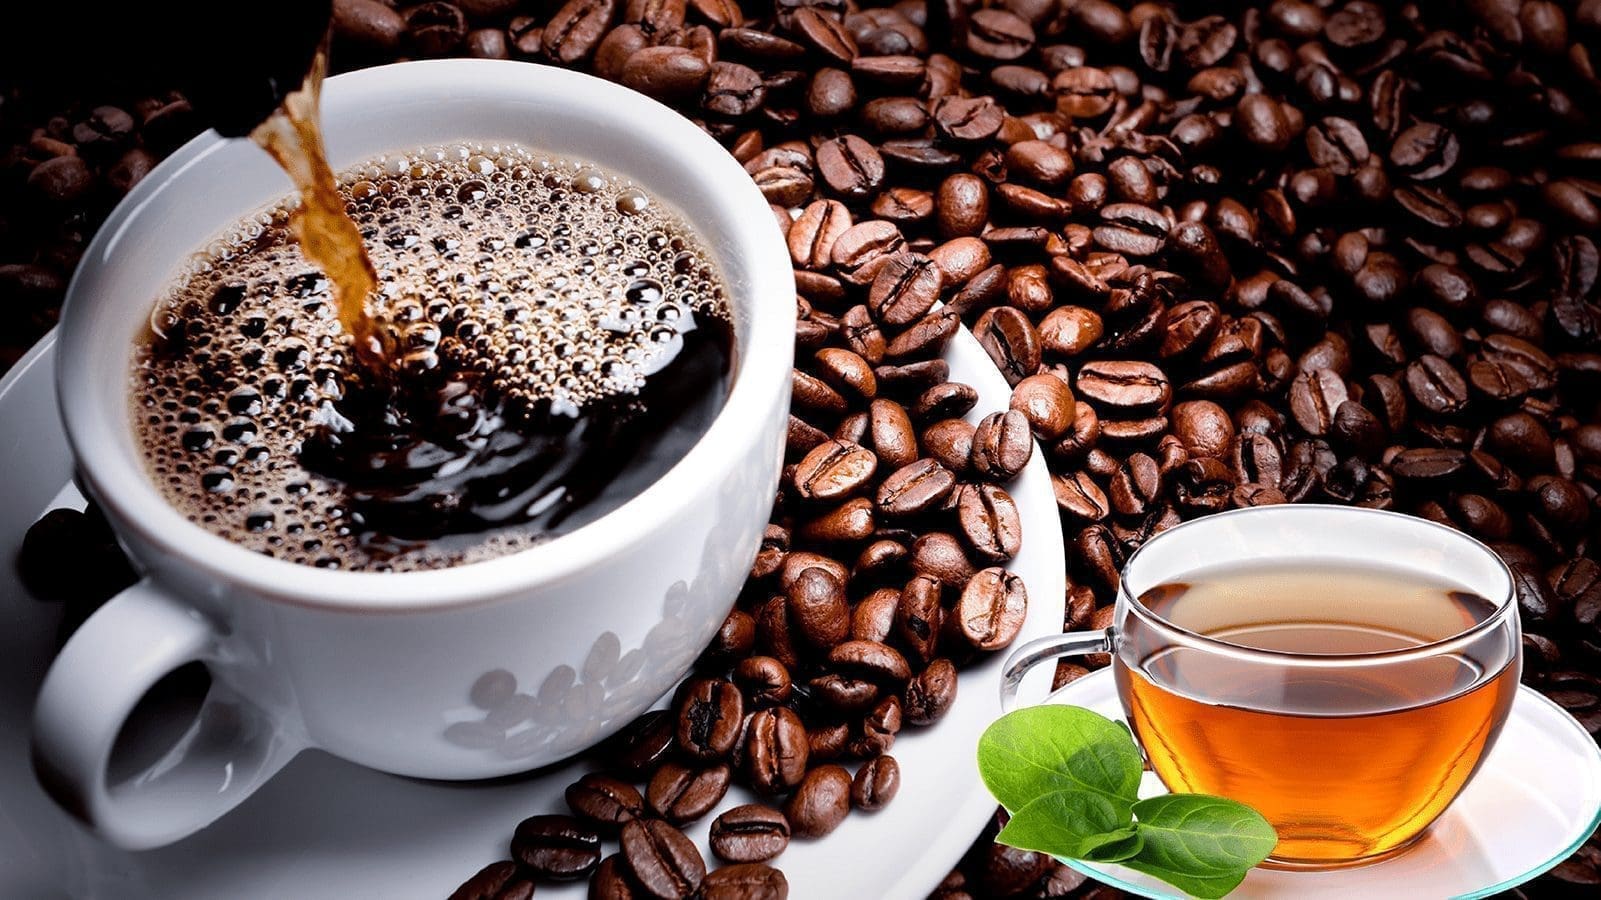 Convenience And New Trends Boost Tea And Coffee Drinks Innovation